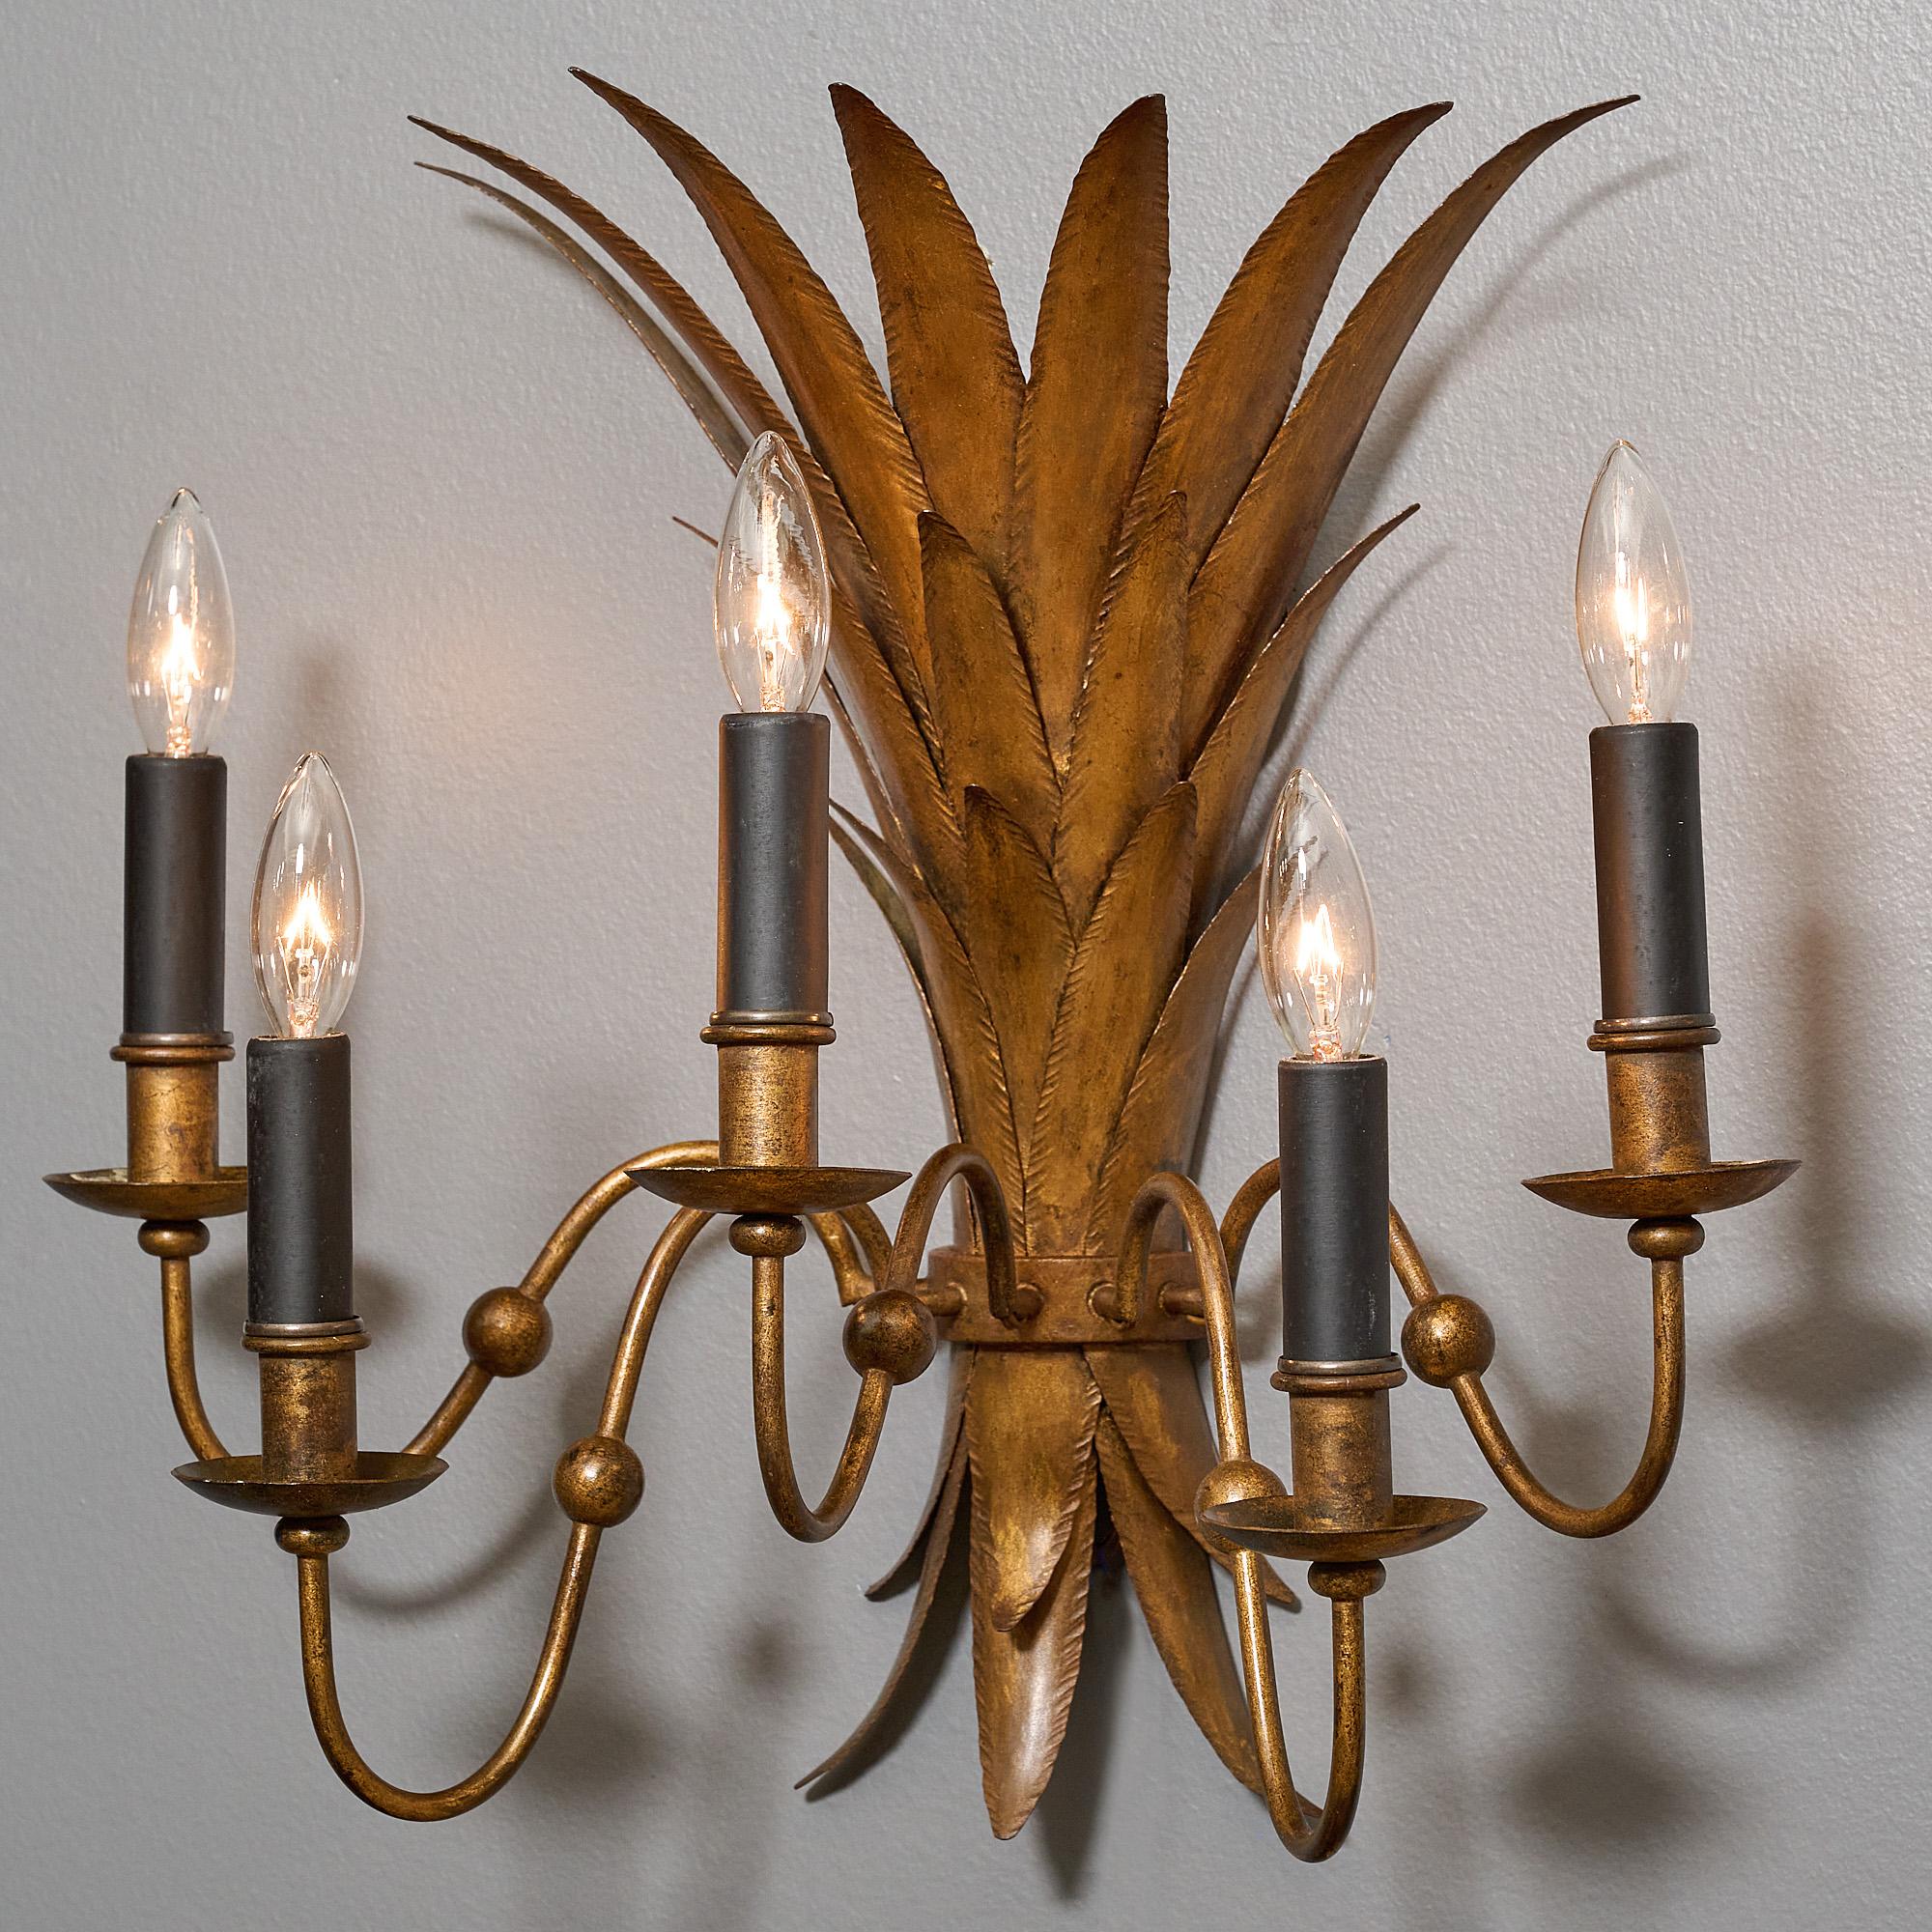 Mid-20th Century Sheaf of Wheat Sconces For Sale